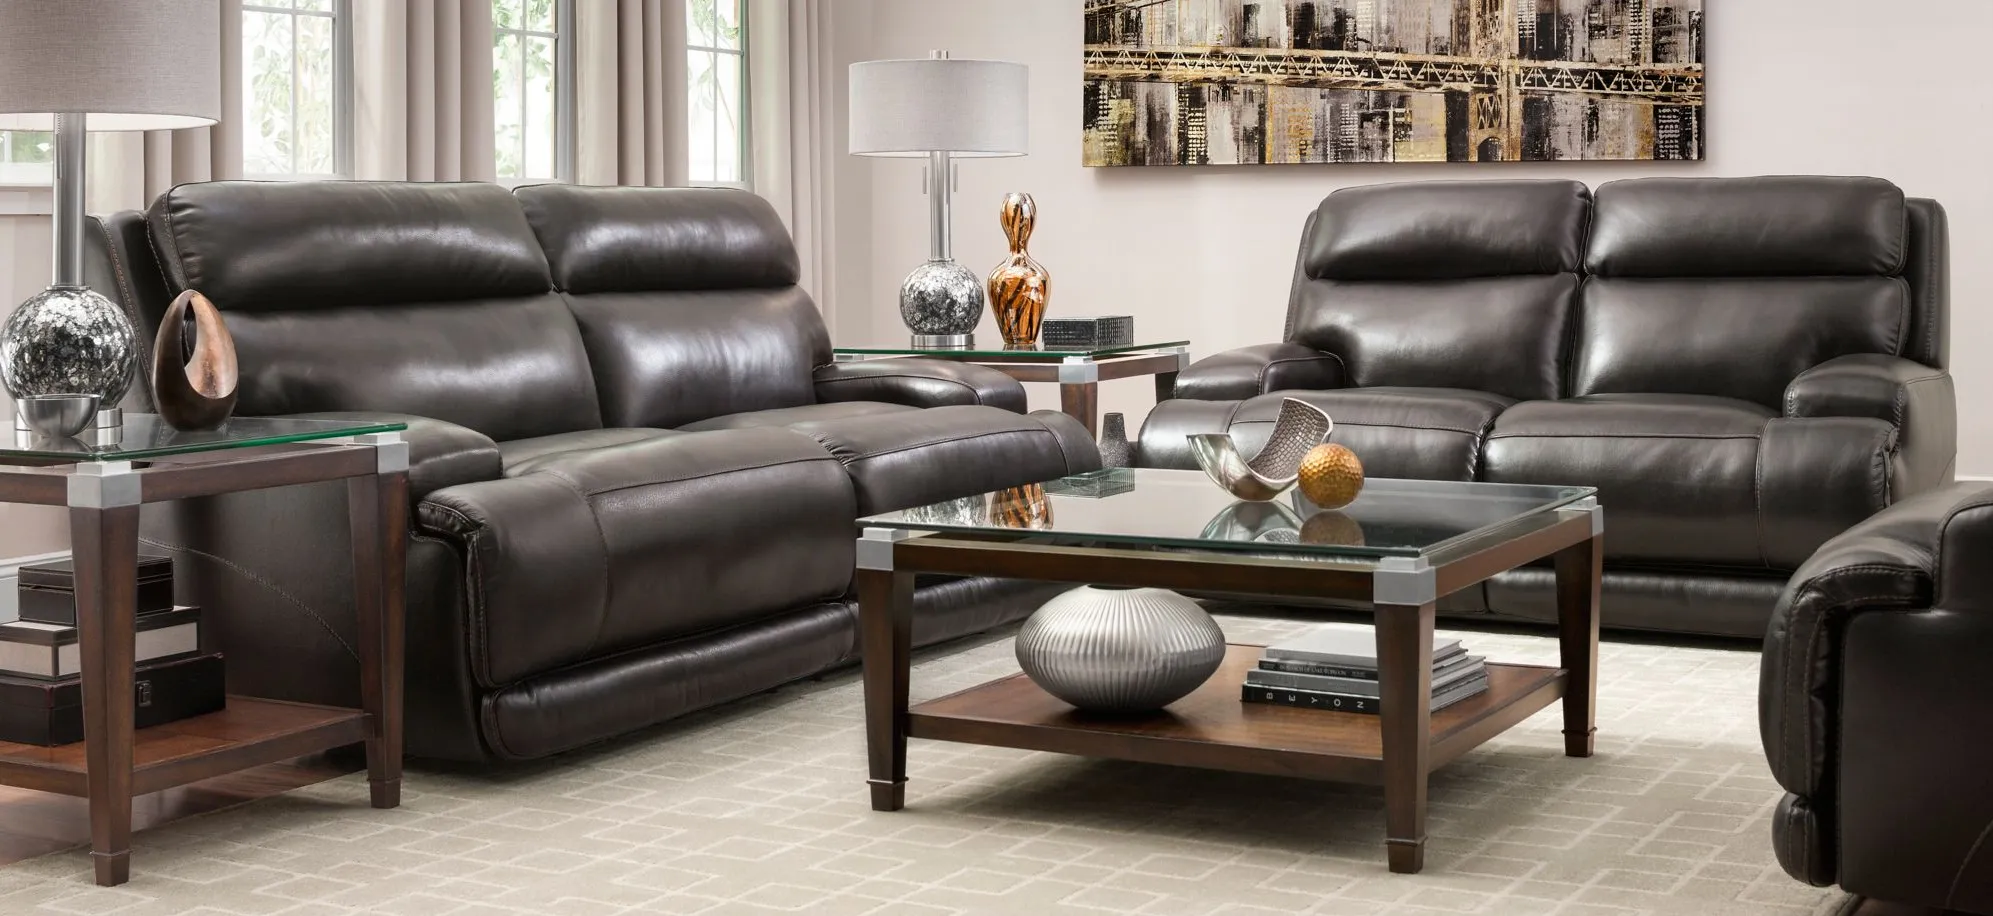 Tompkins 2-pc. Power Sofa and Loveseat Set in Blackberry by Bellanest